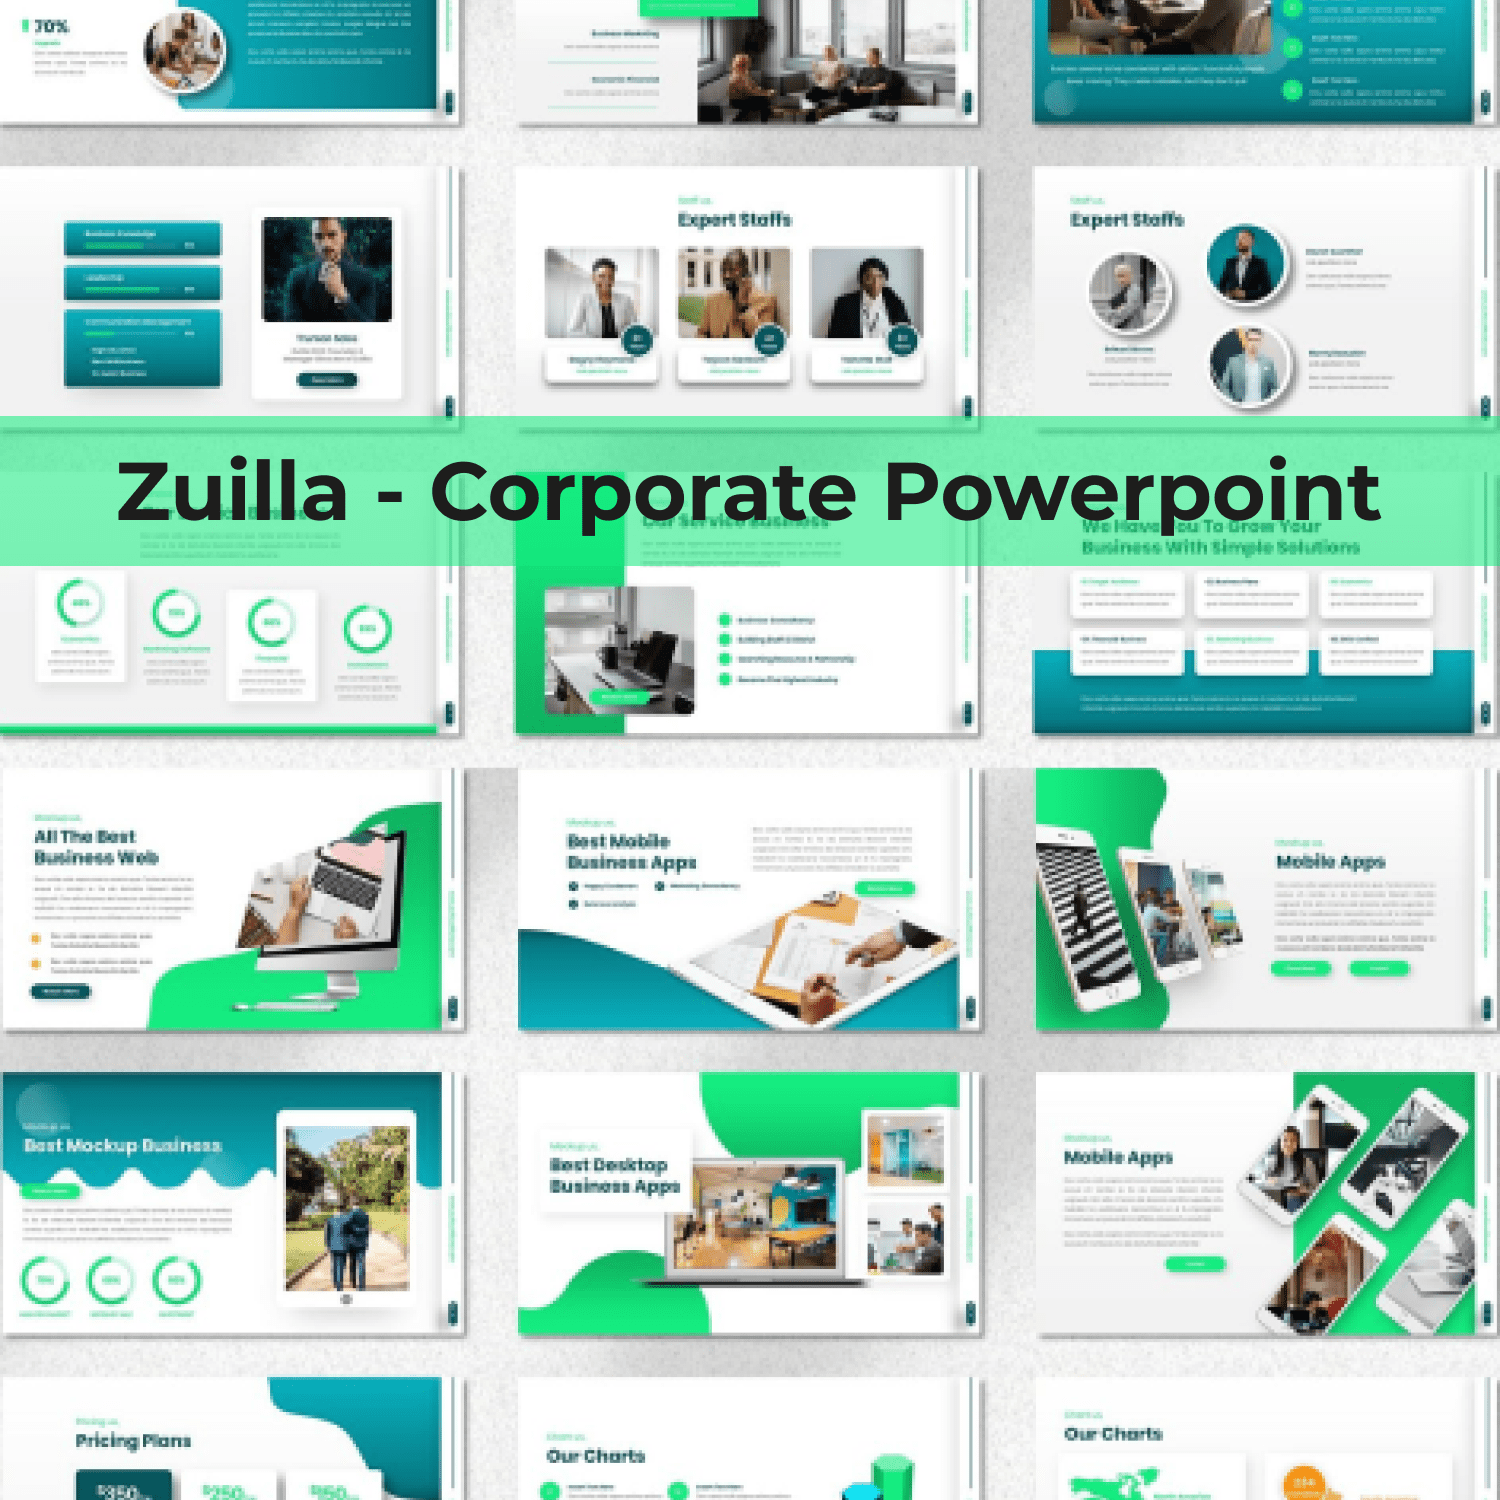 Zuilla - Corporate Powerpoint cover image.